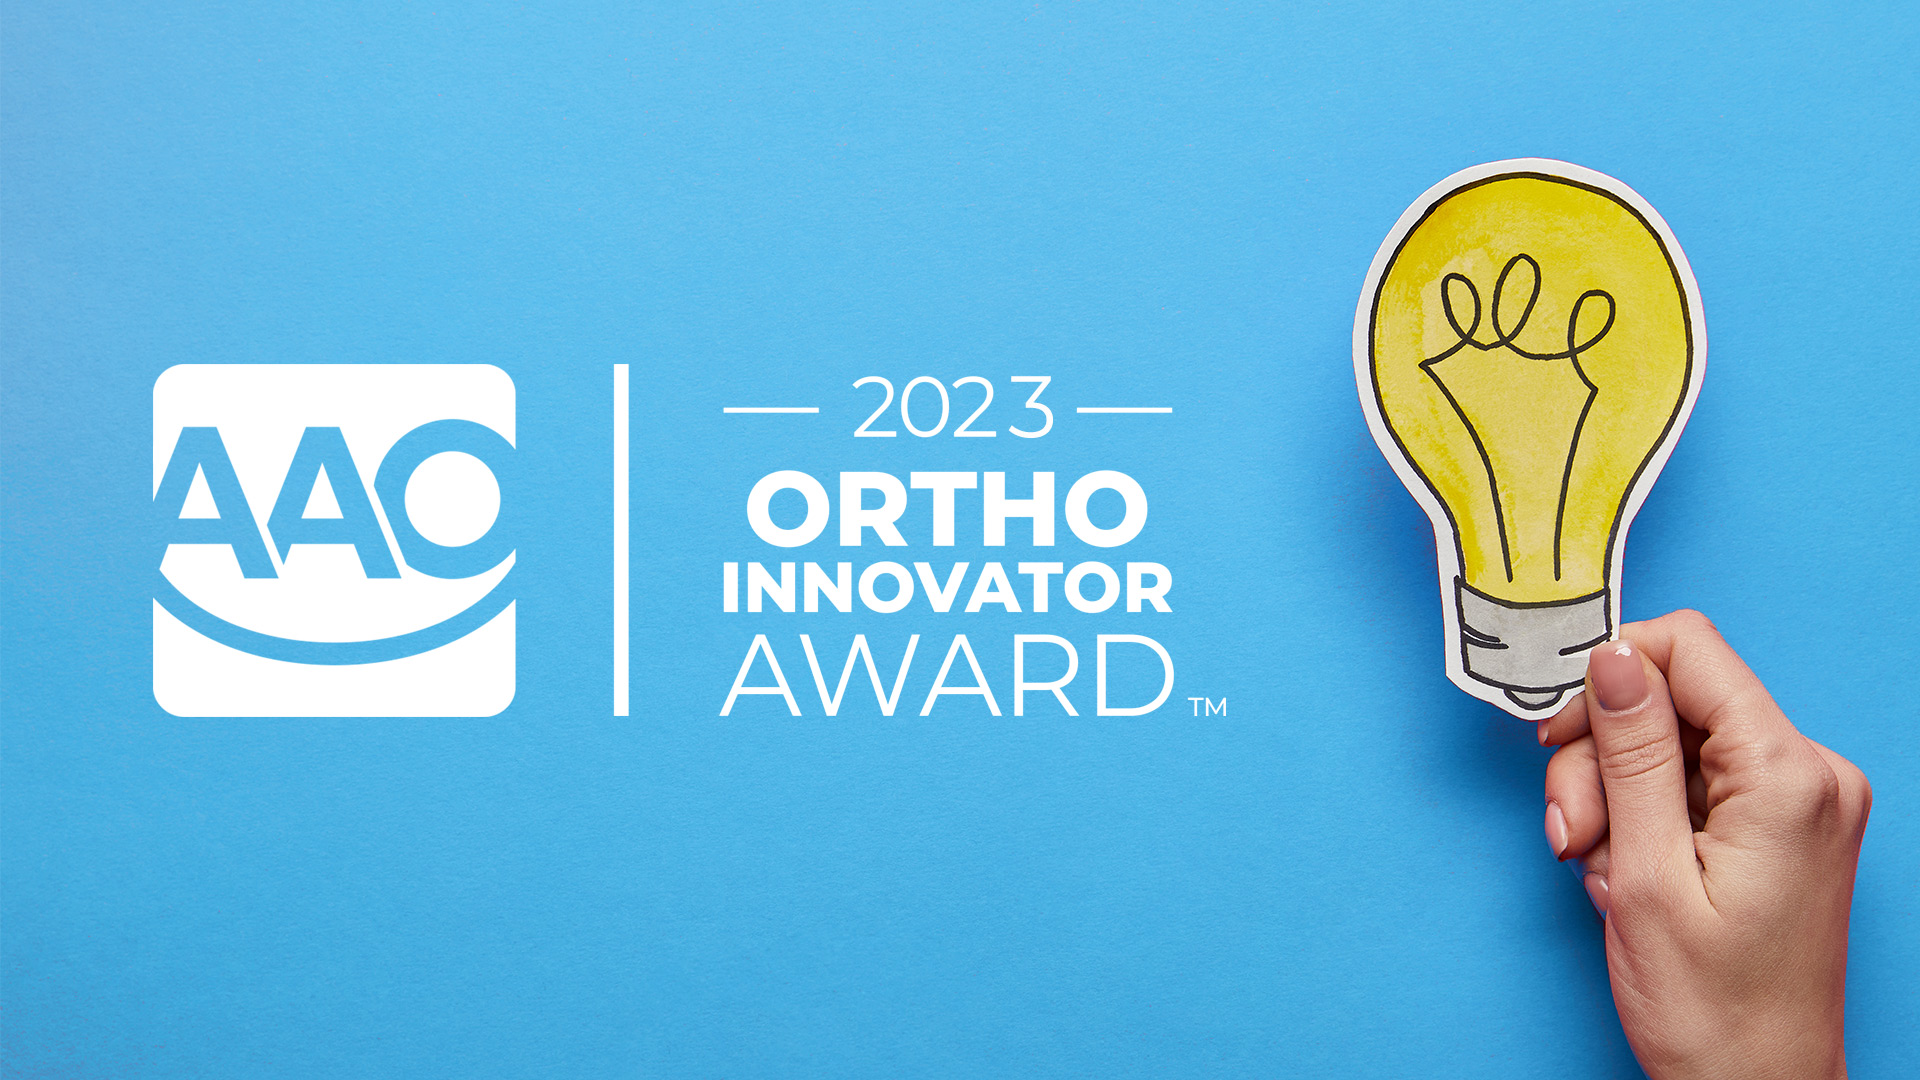 AAO Accepting Applications for the 2023 Ortho Innovator Award AAO